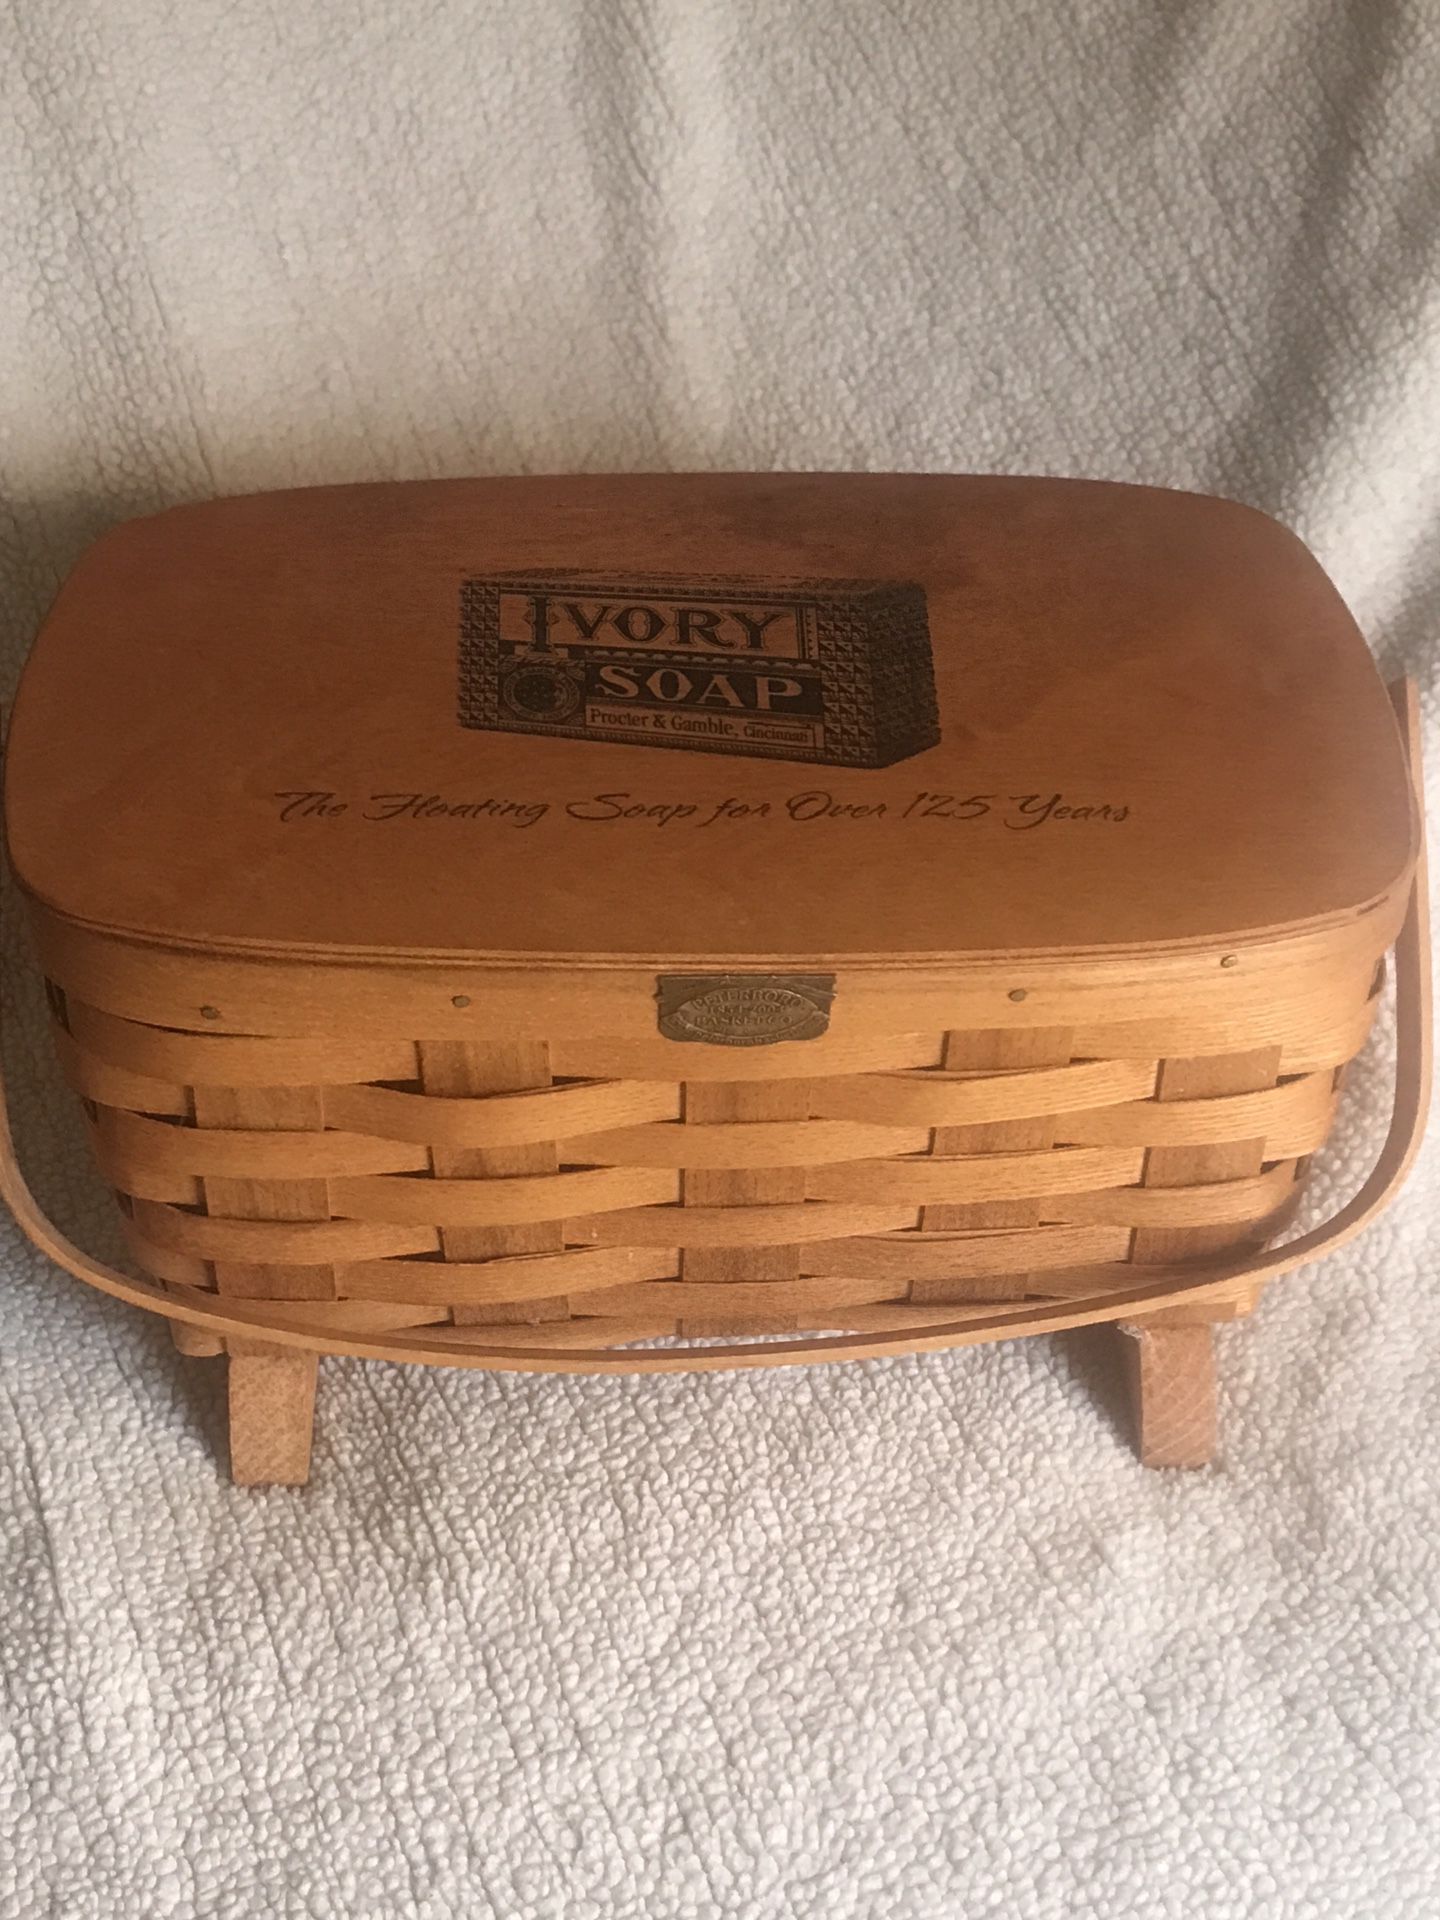 Procter & Gamble 125th Ivory Soap Anniversary Picnic Wooden Weave Basket